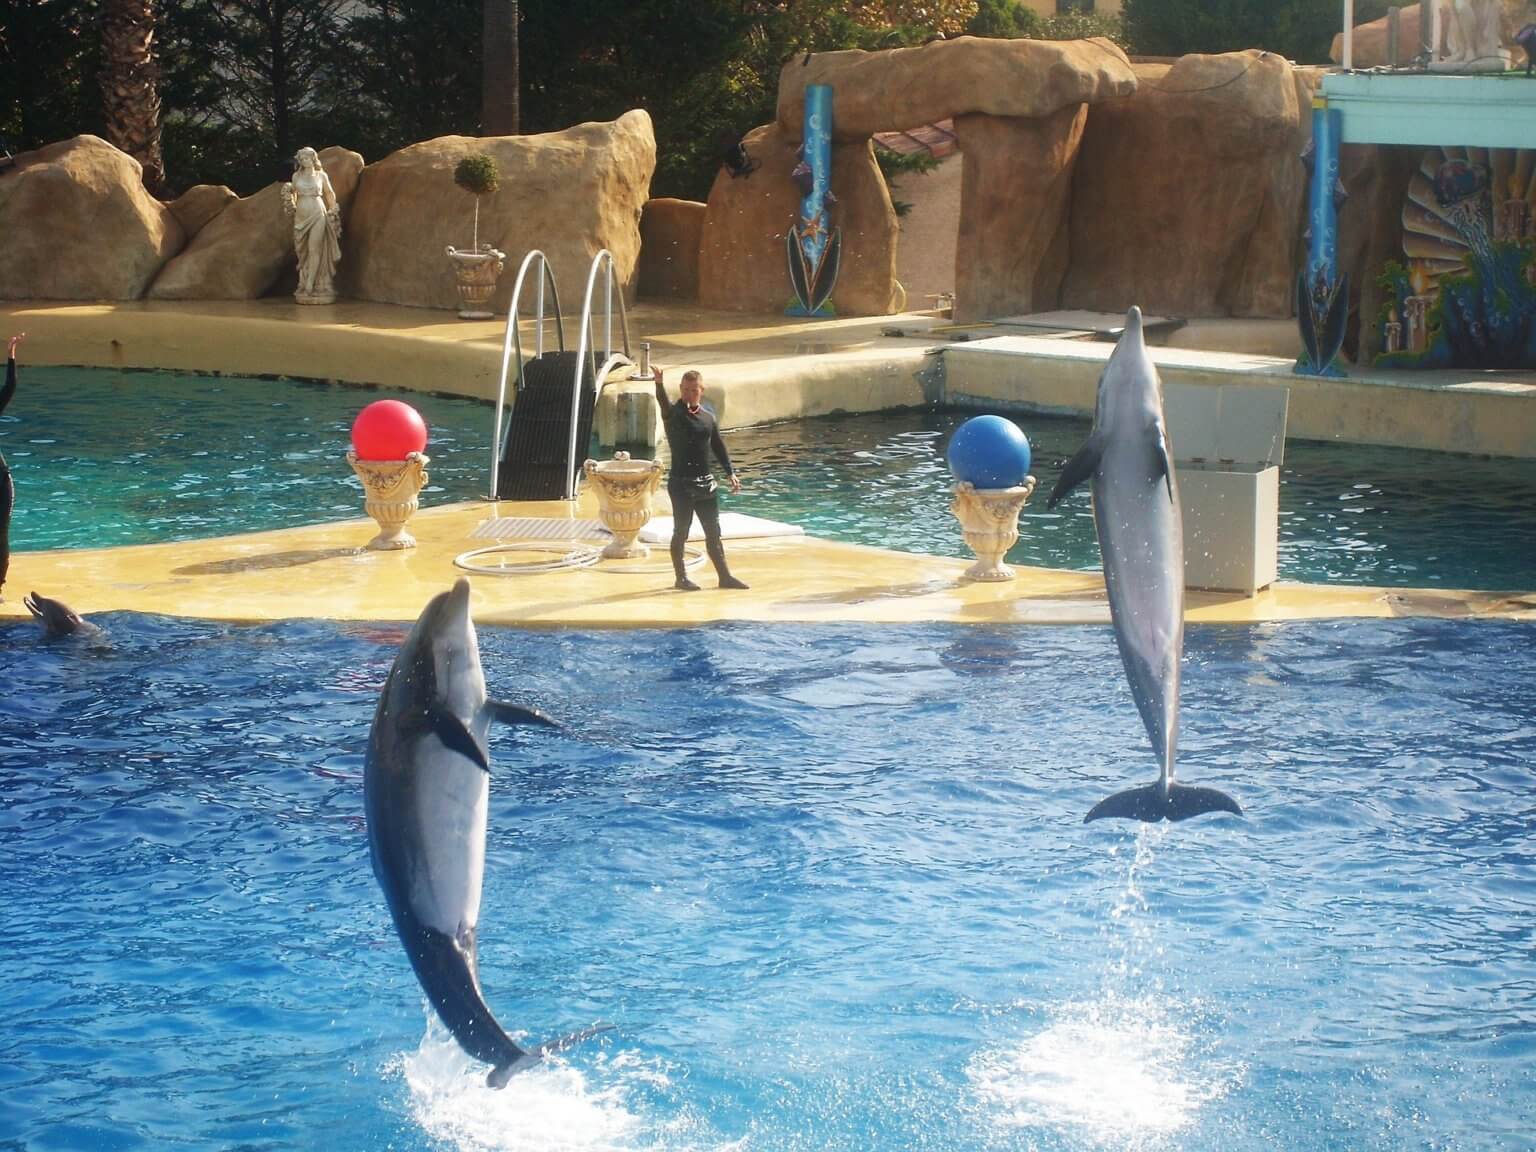 PETA-owned image of dolphins at SeaWorld